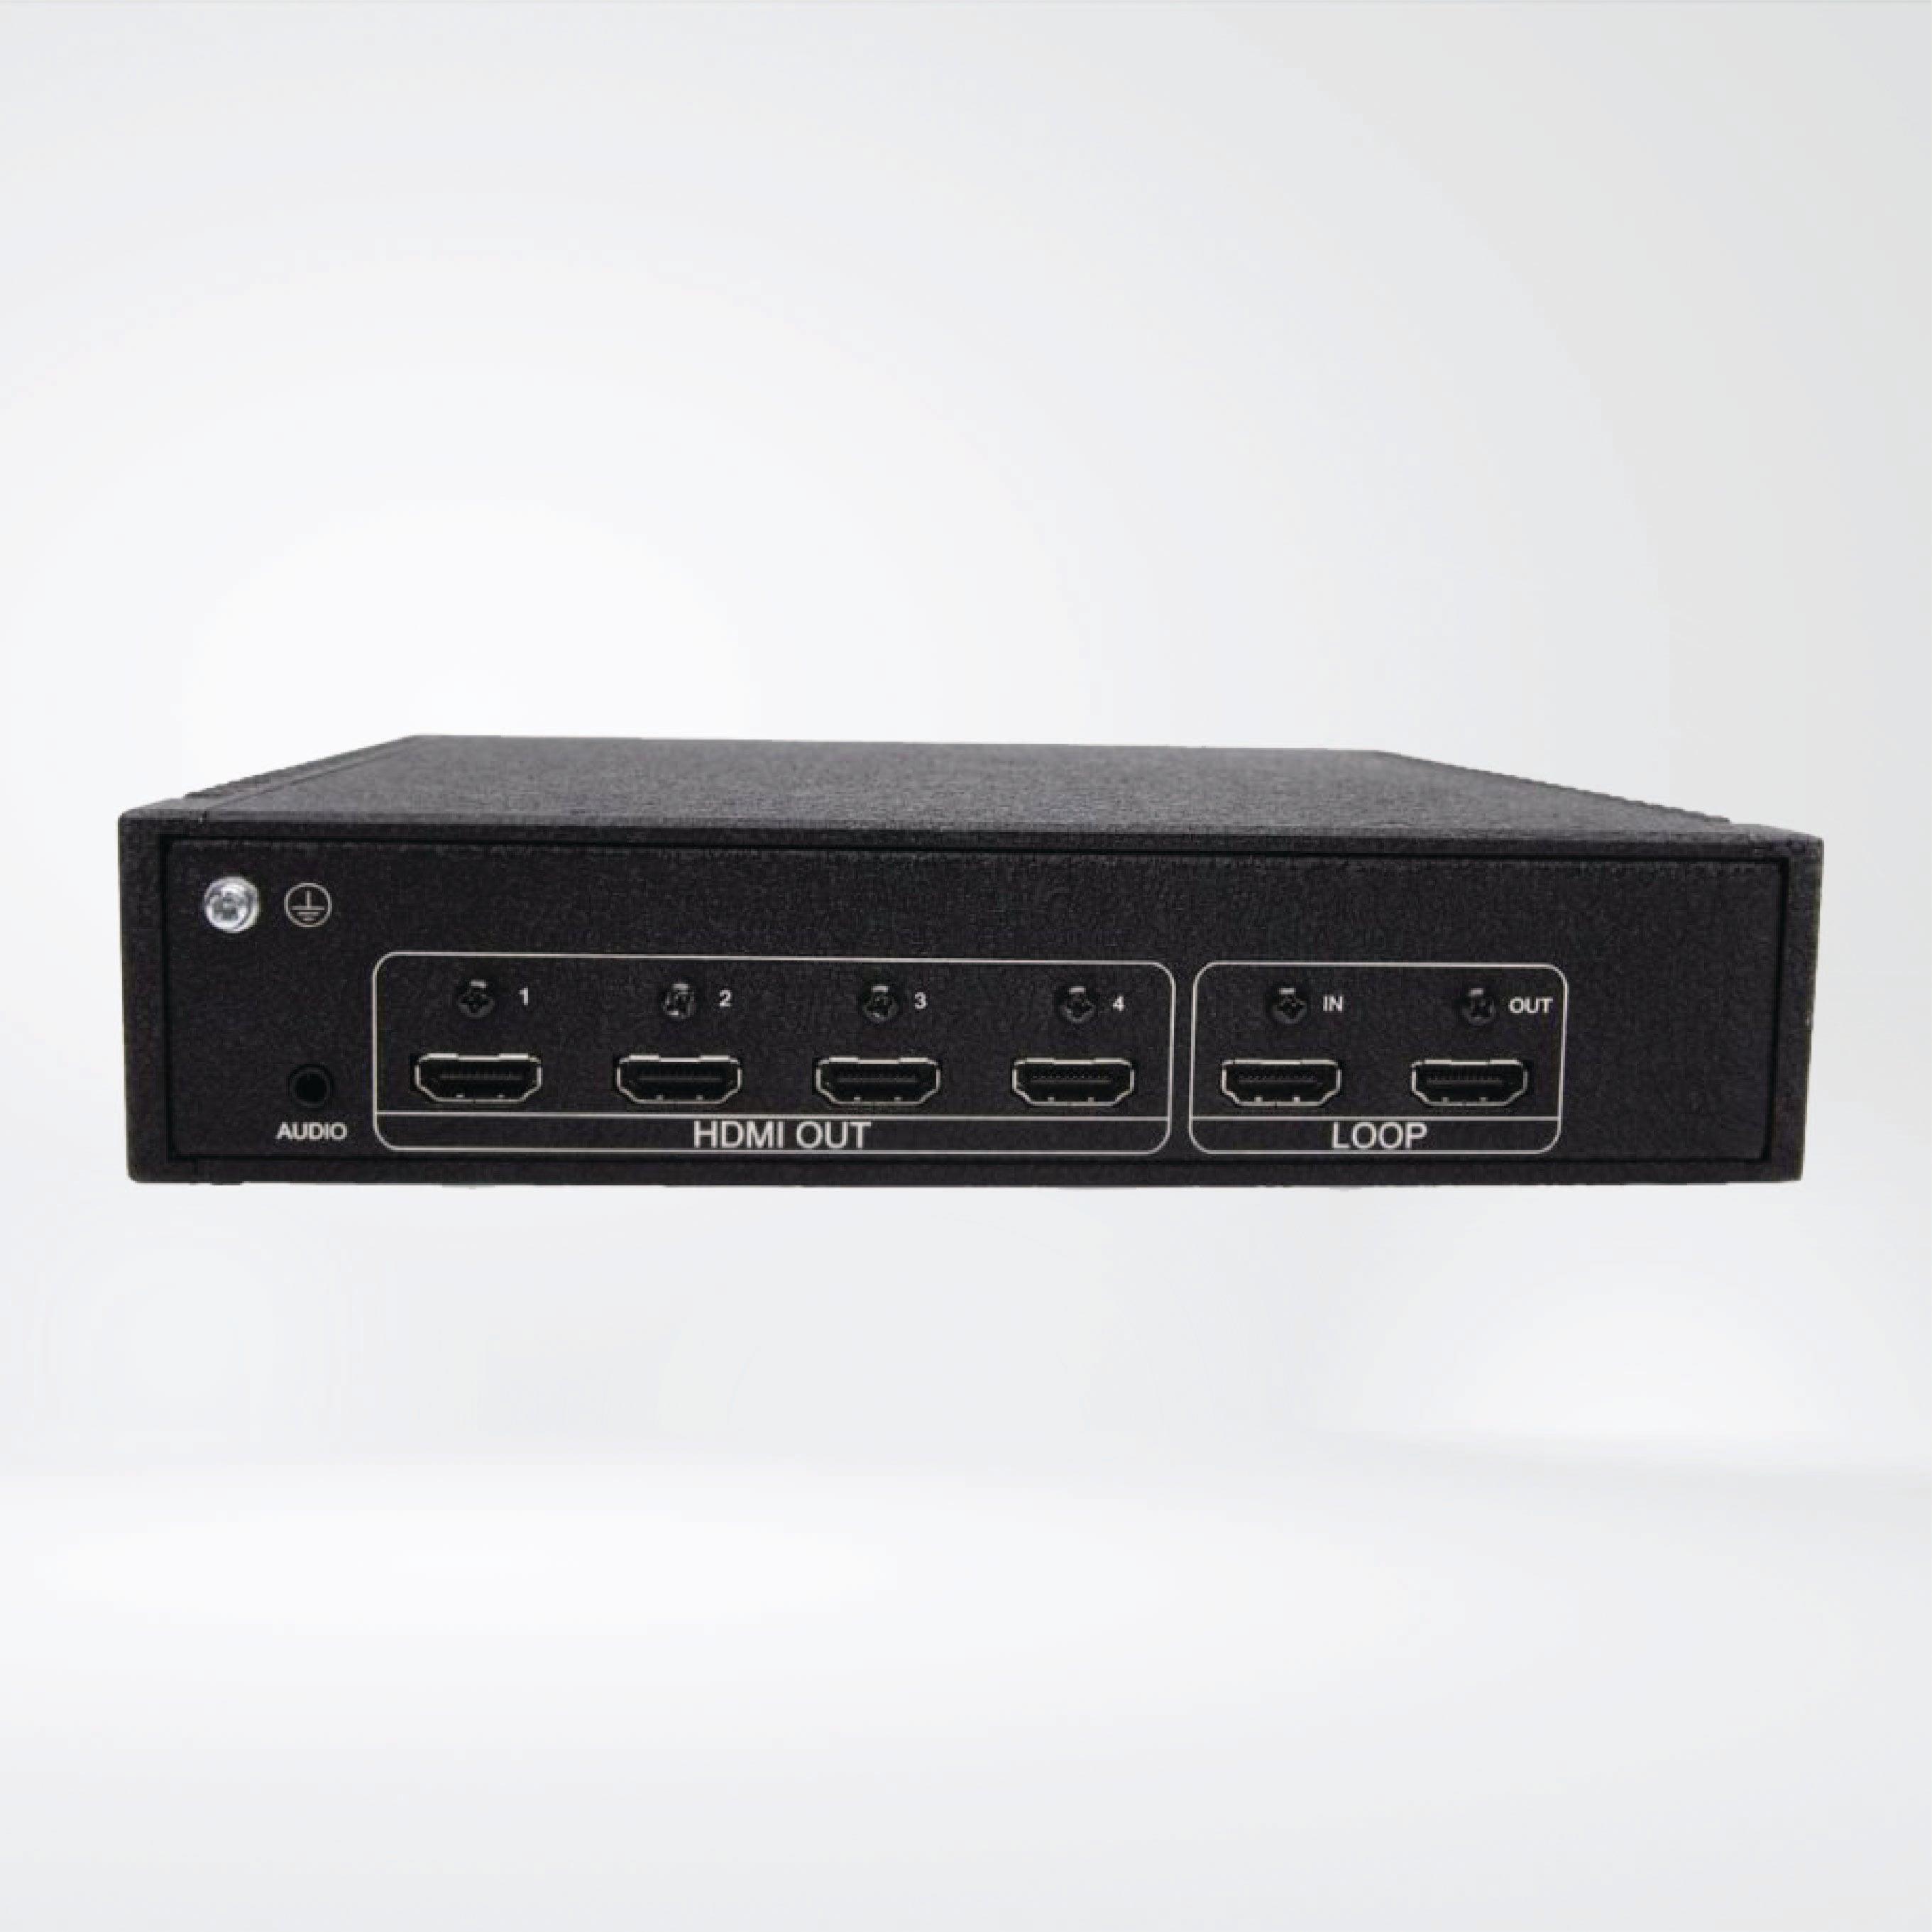 G4K Pro Creative Video Wall Controllers - Riverplus